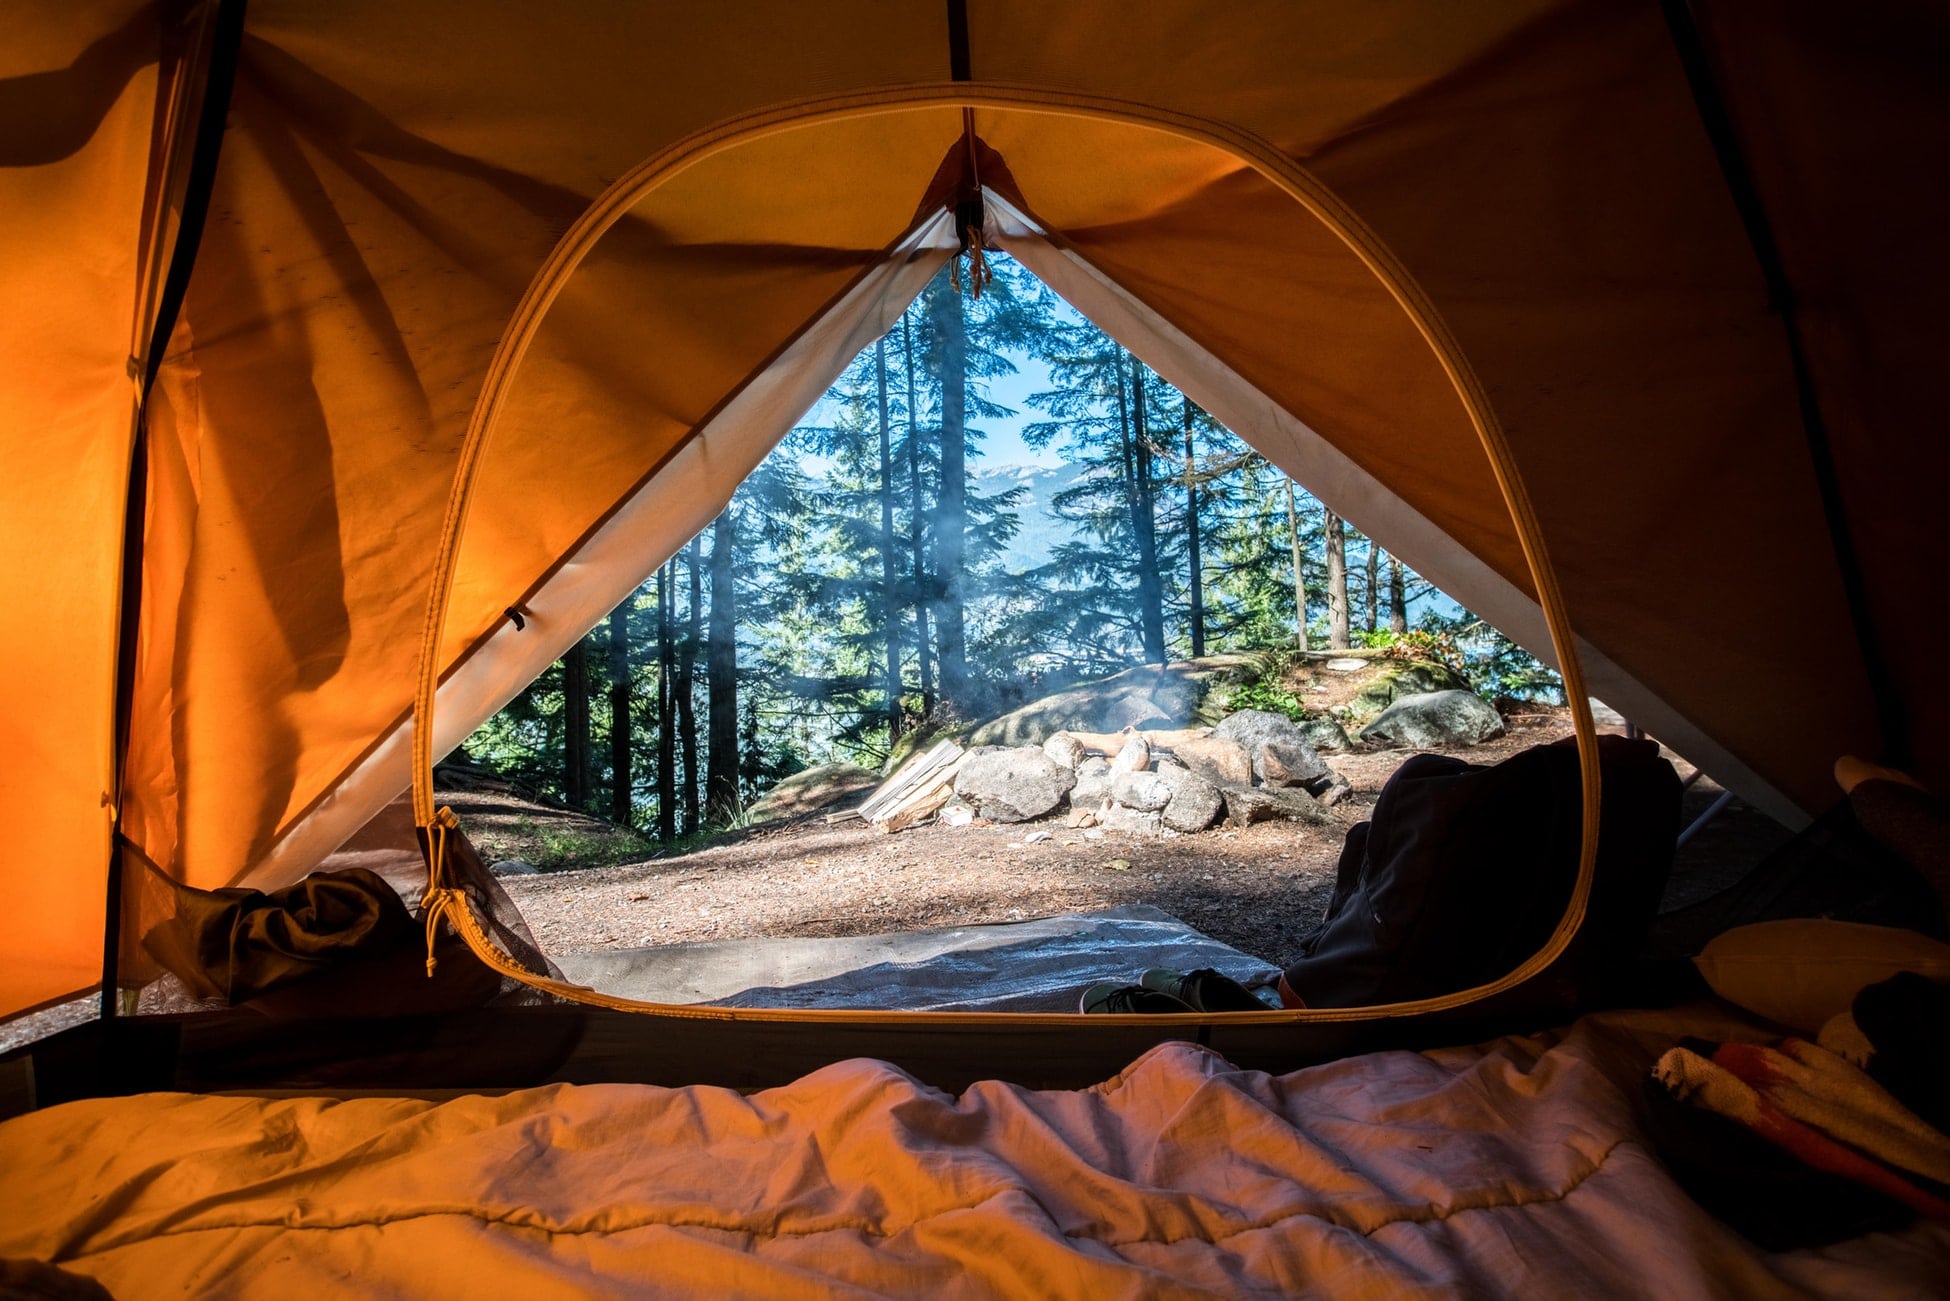 35 Camping Road Trip Essentials For Your Packing List [2022]